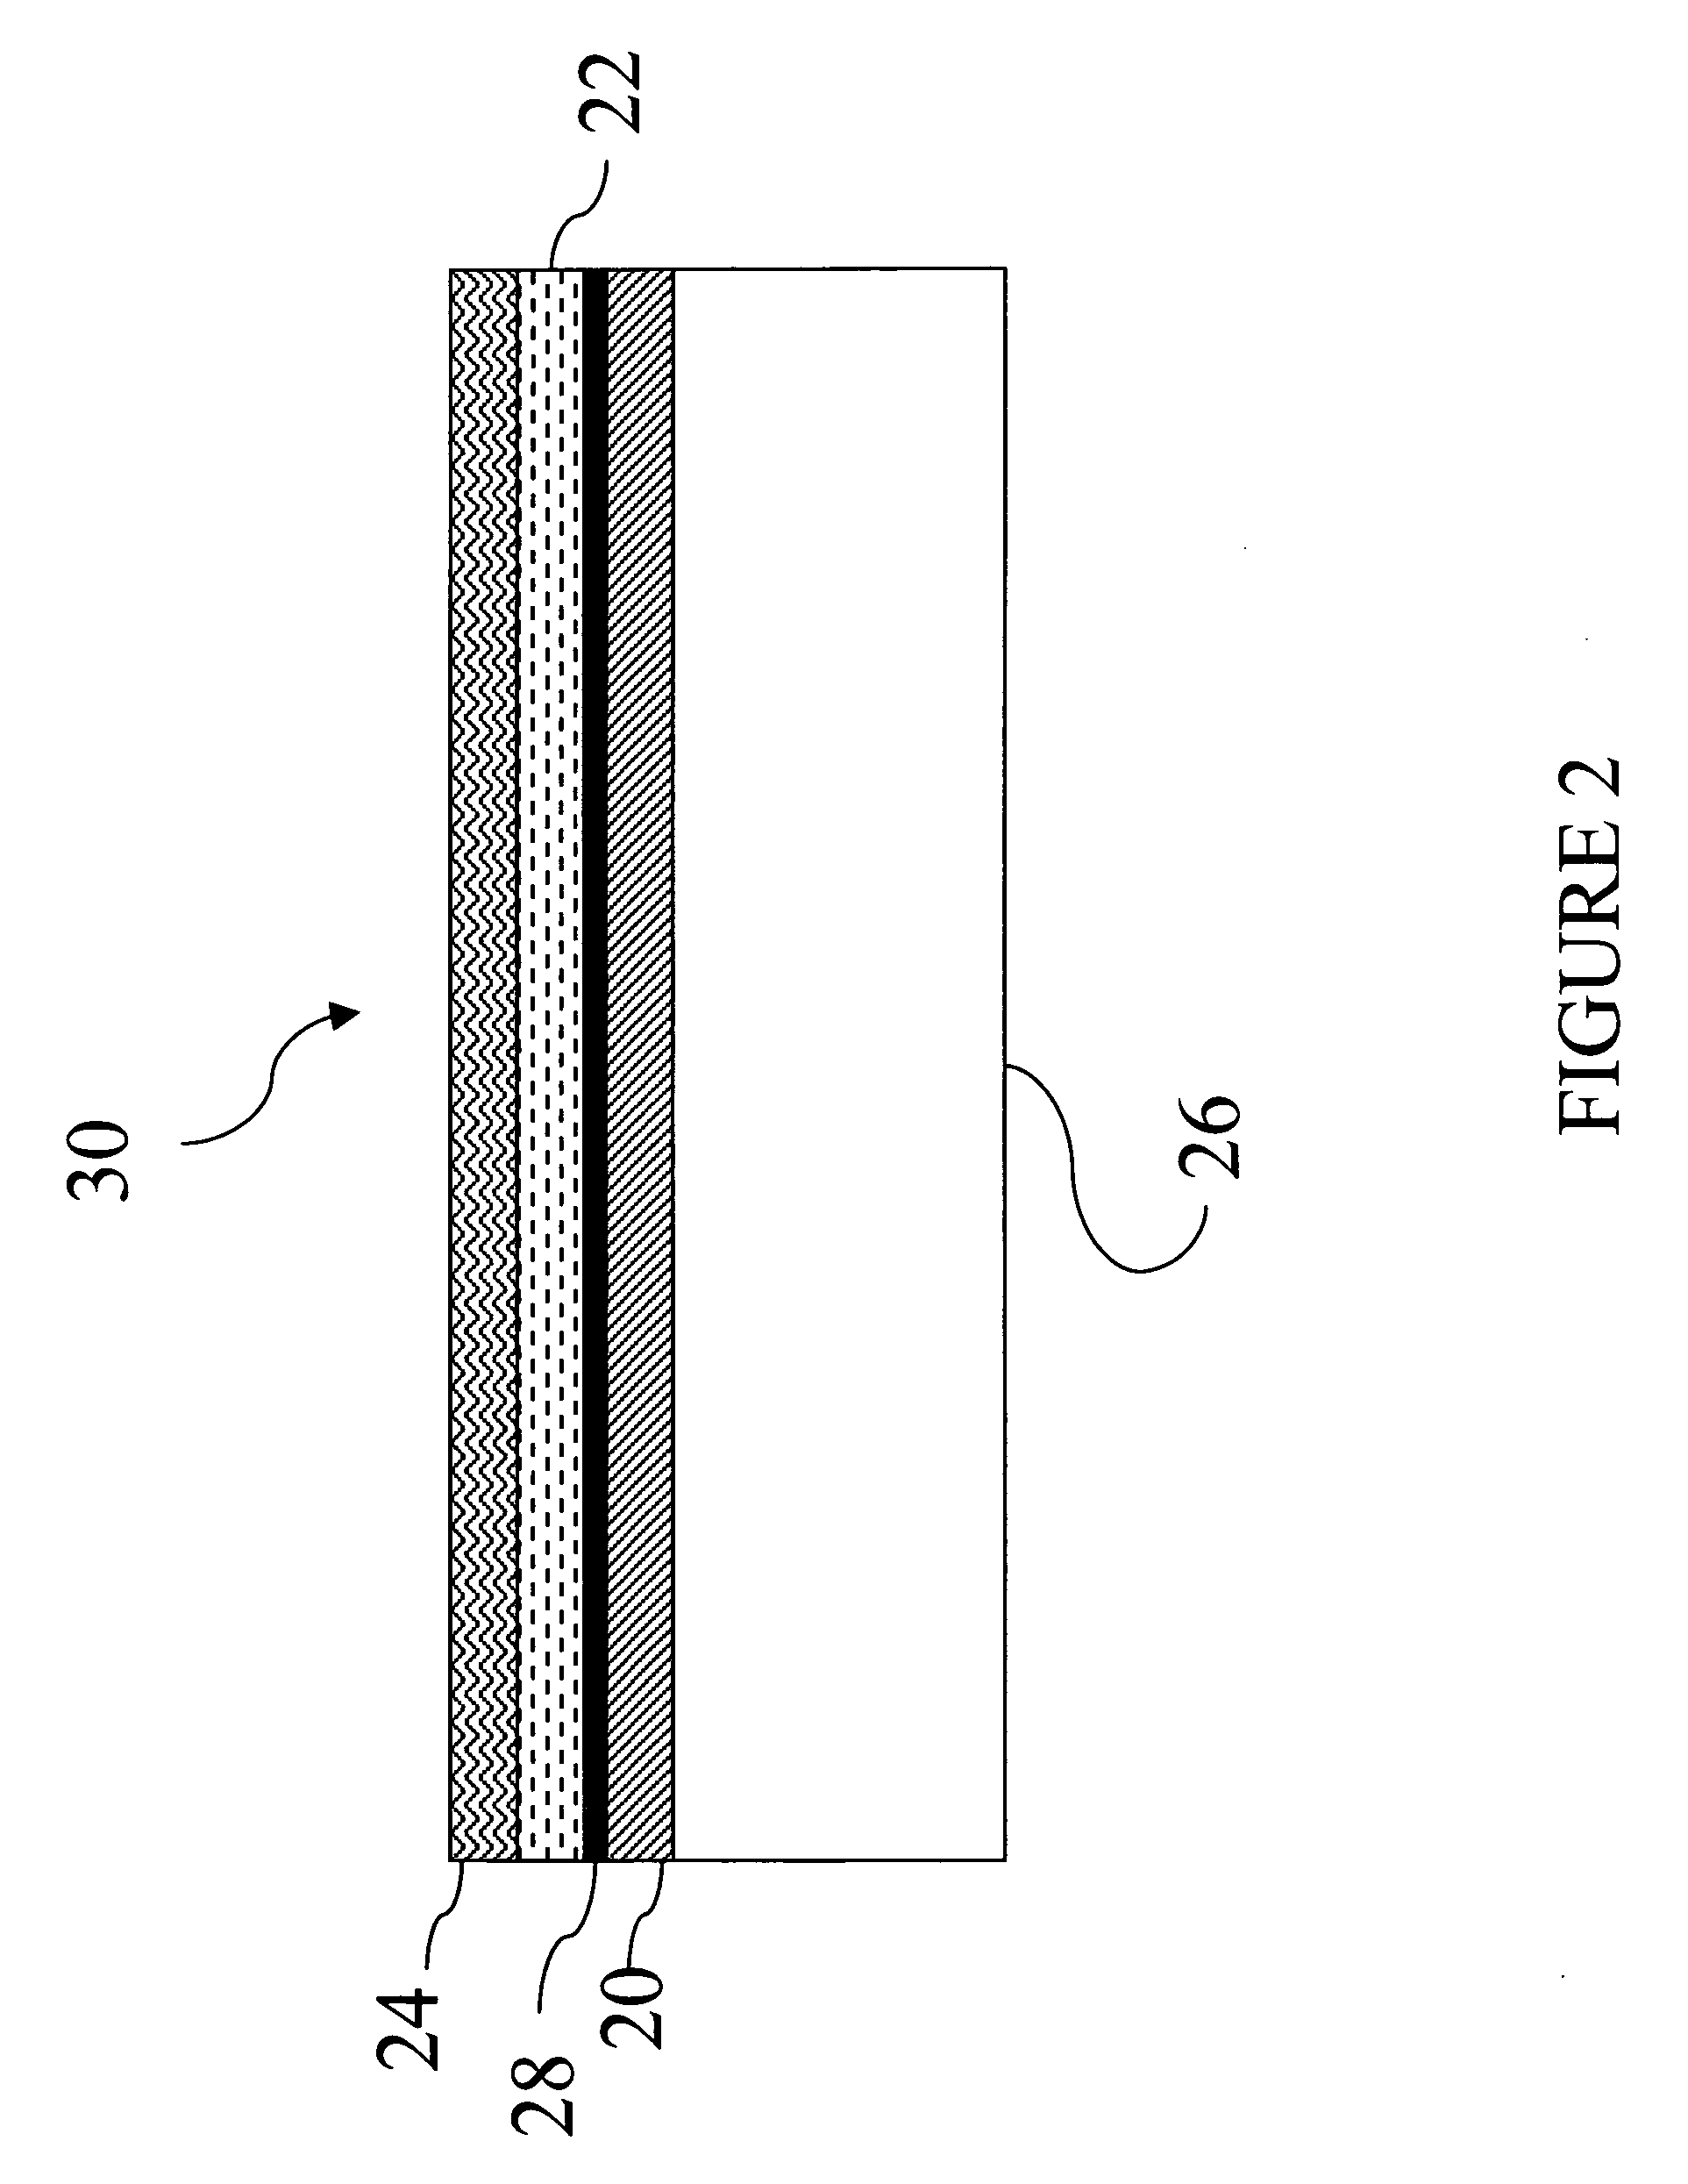 Metal and electronically conductive polymer transfer